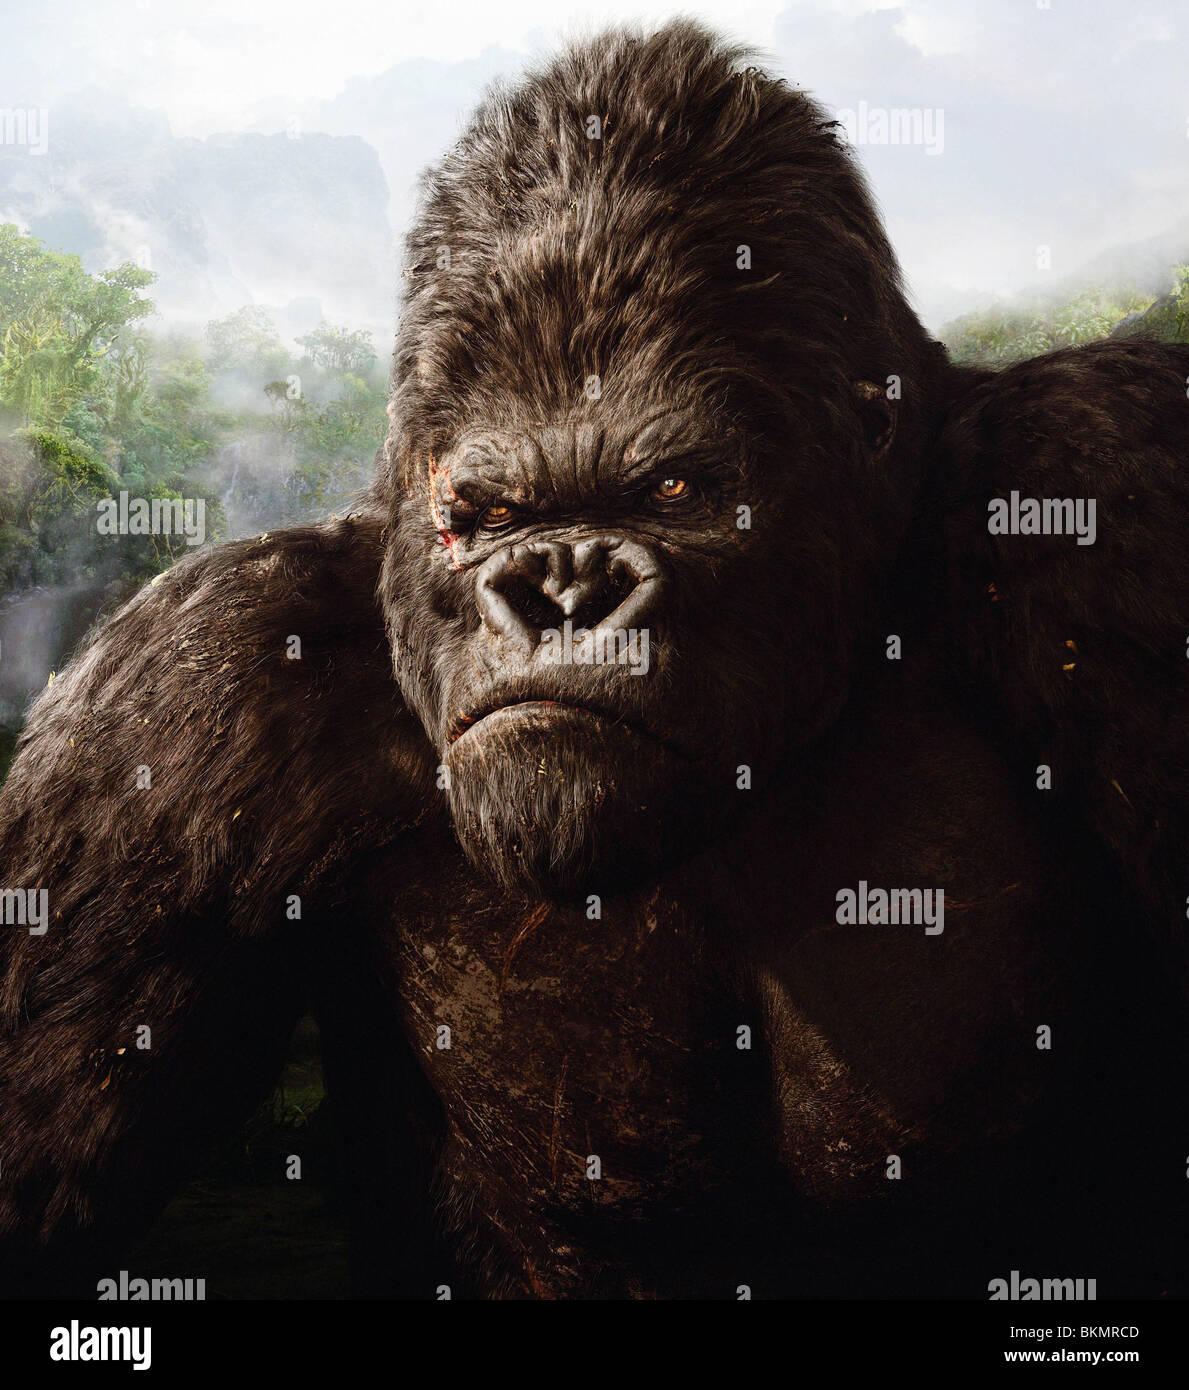 Collection 99+ Images show me a picture of king kong Full HD, 2k, 4k